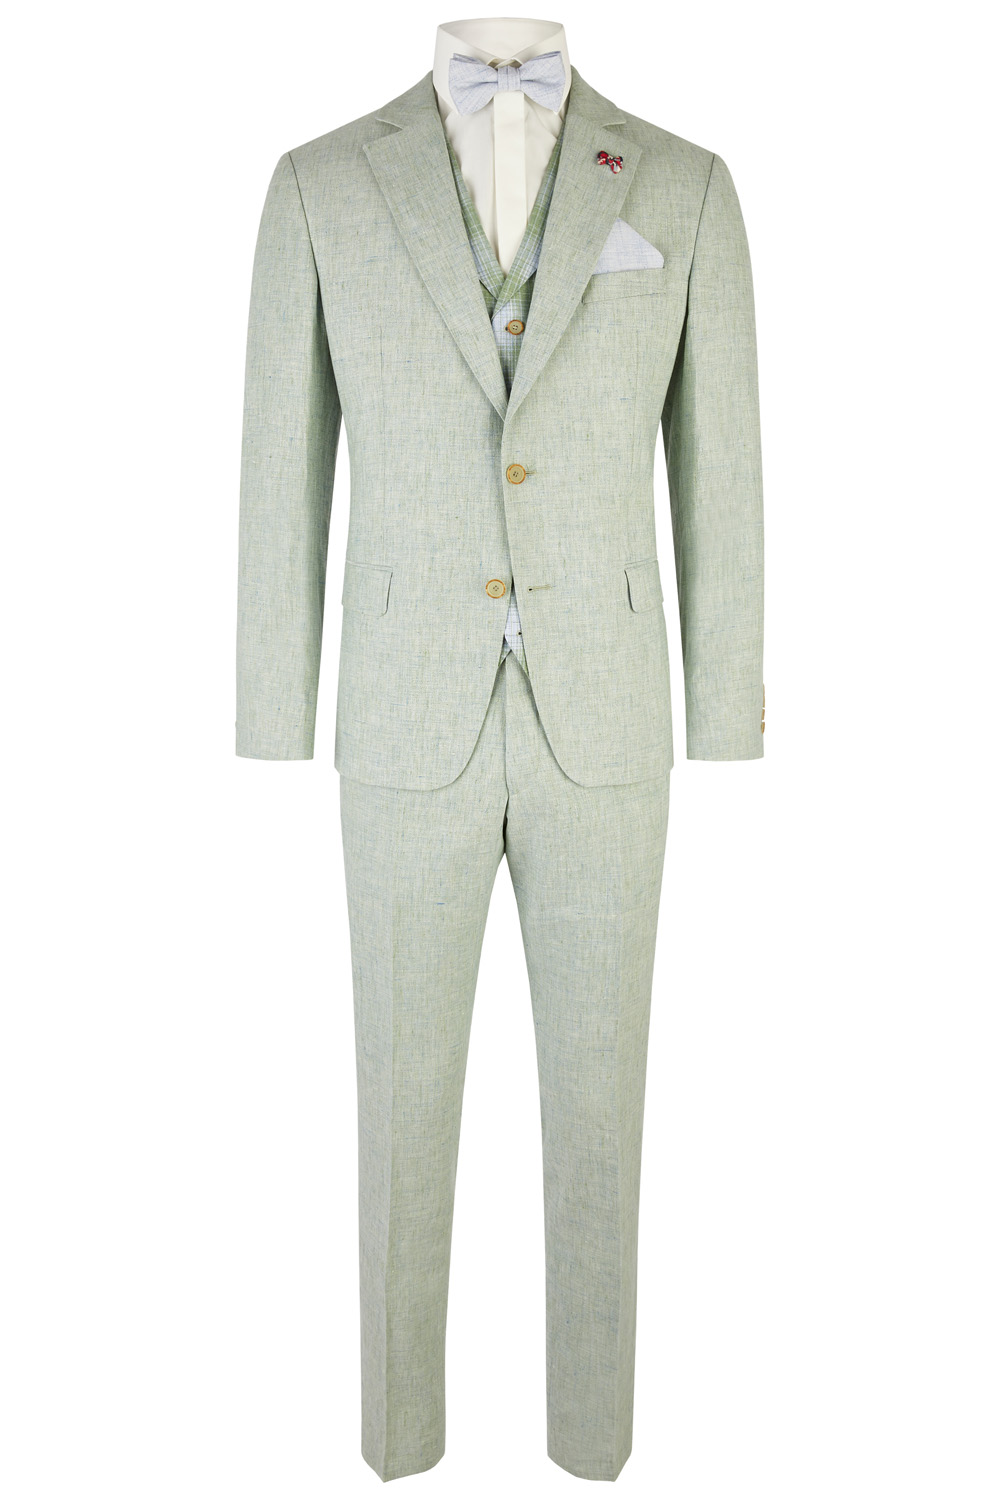 Pastel Green Vintage 3 Piece Wedding Suit - Tom Murphy's Formal and ...